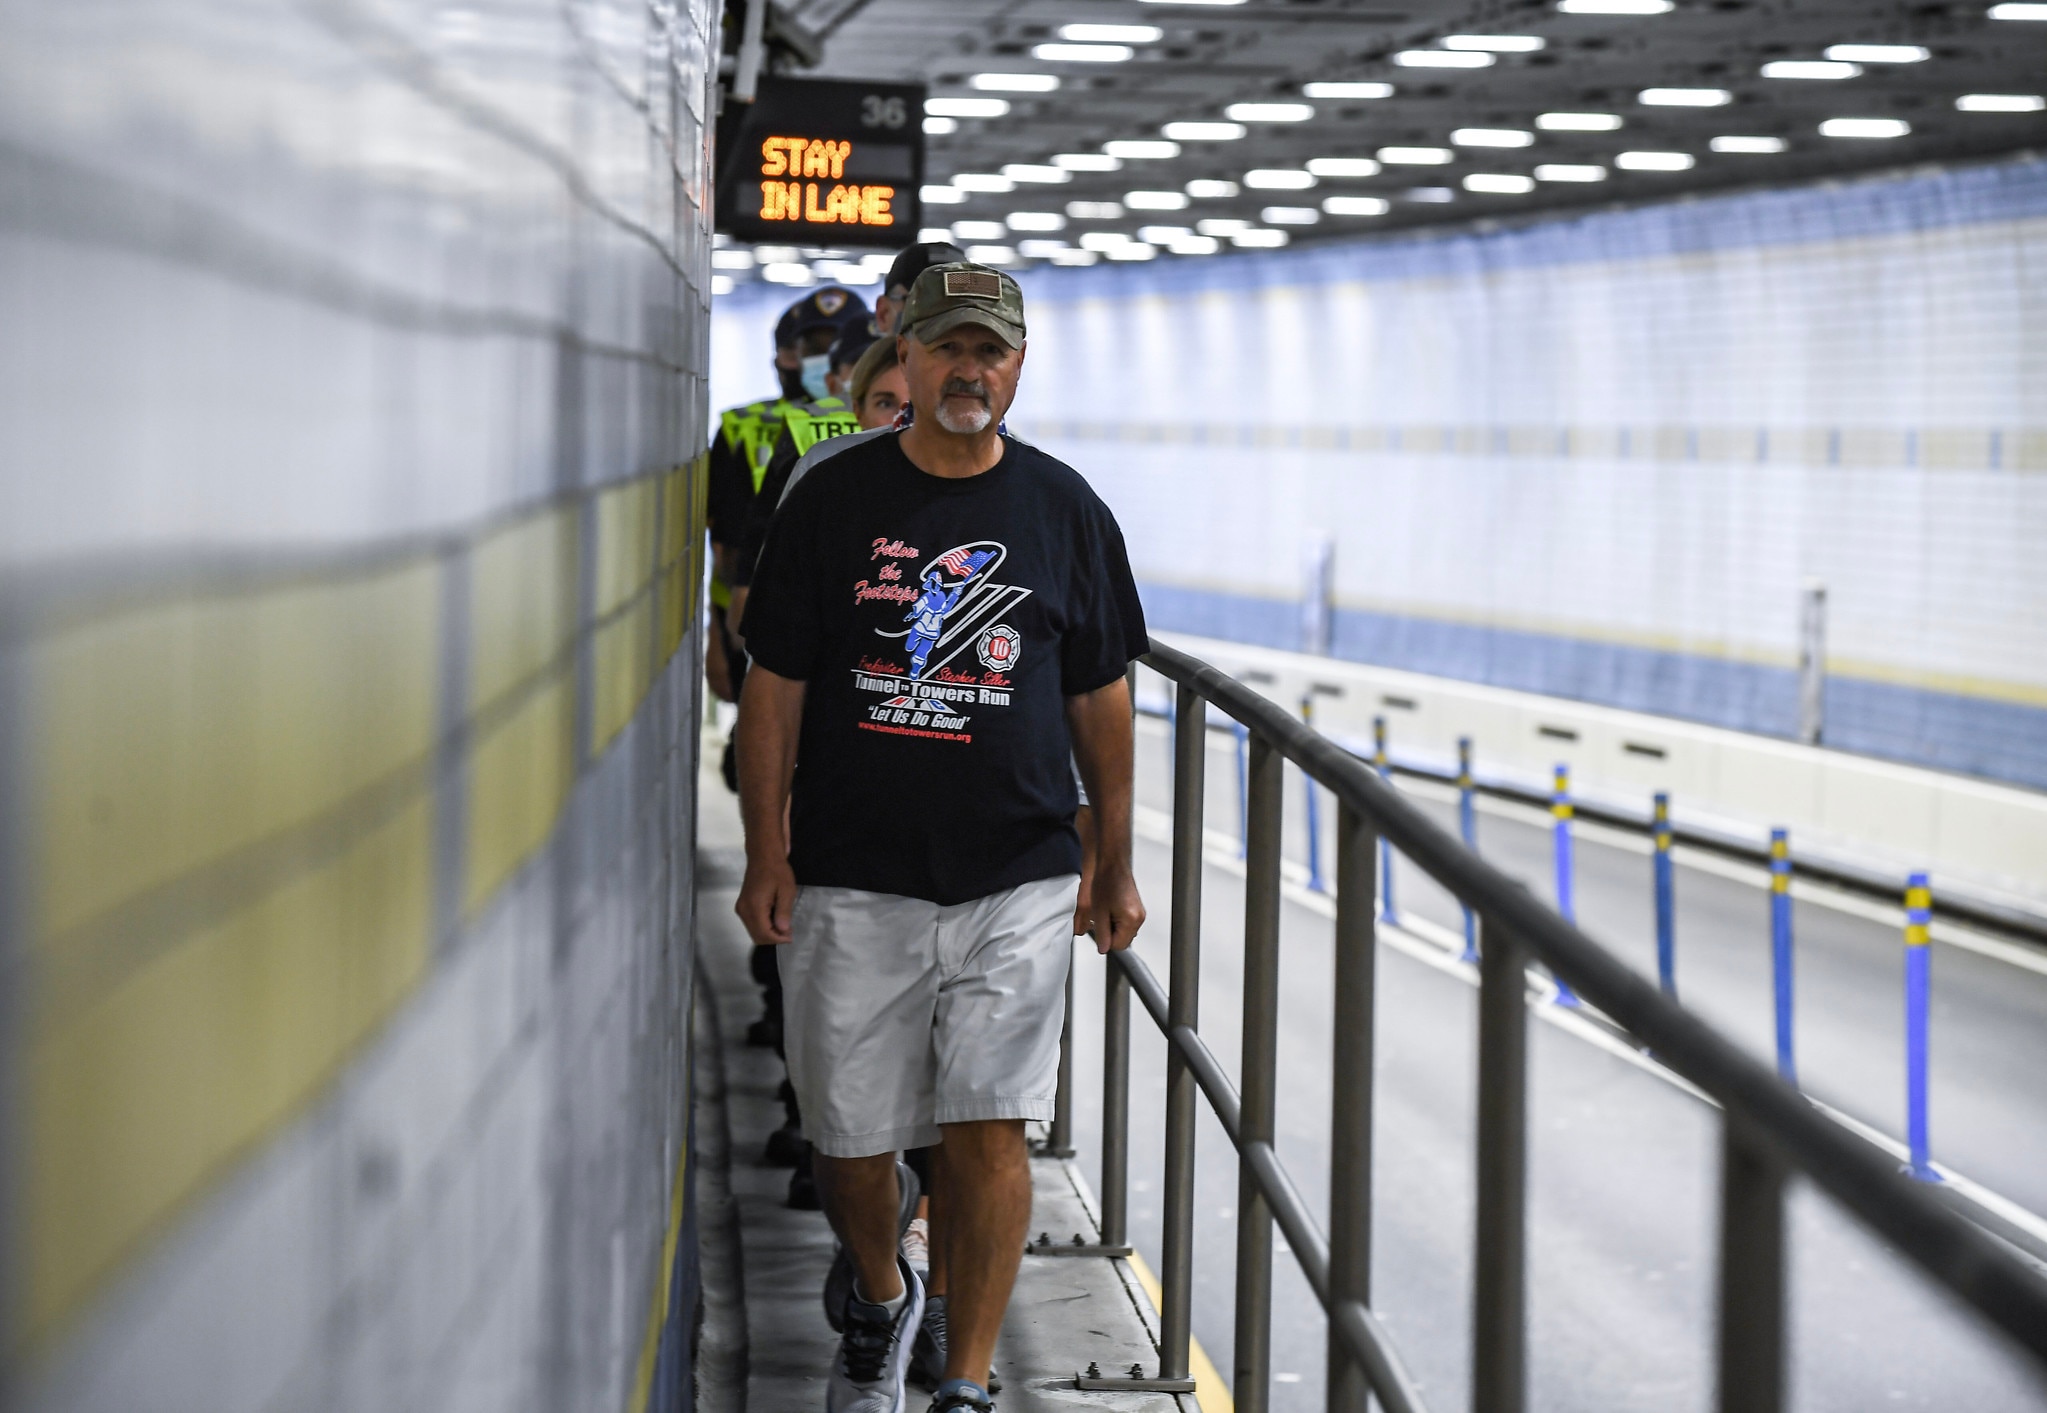 MTA Officials Join Family of Stephen Siller and Tunnel to Towers Foundation in Remembrance Walk Through the Hugh L. Carey Tunnel